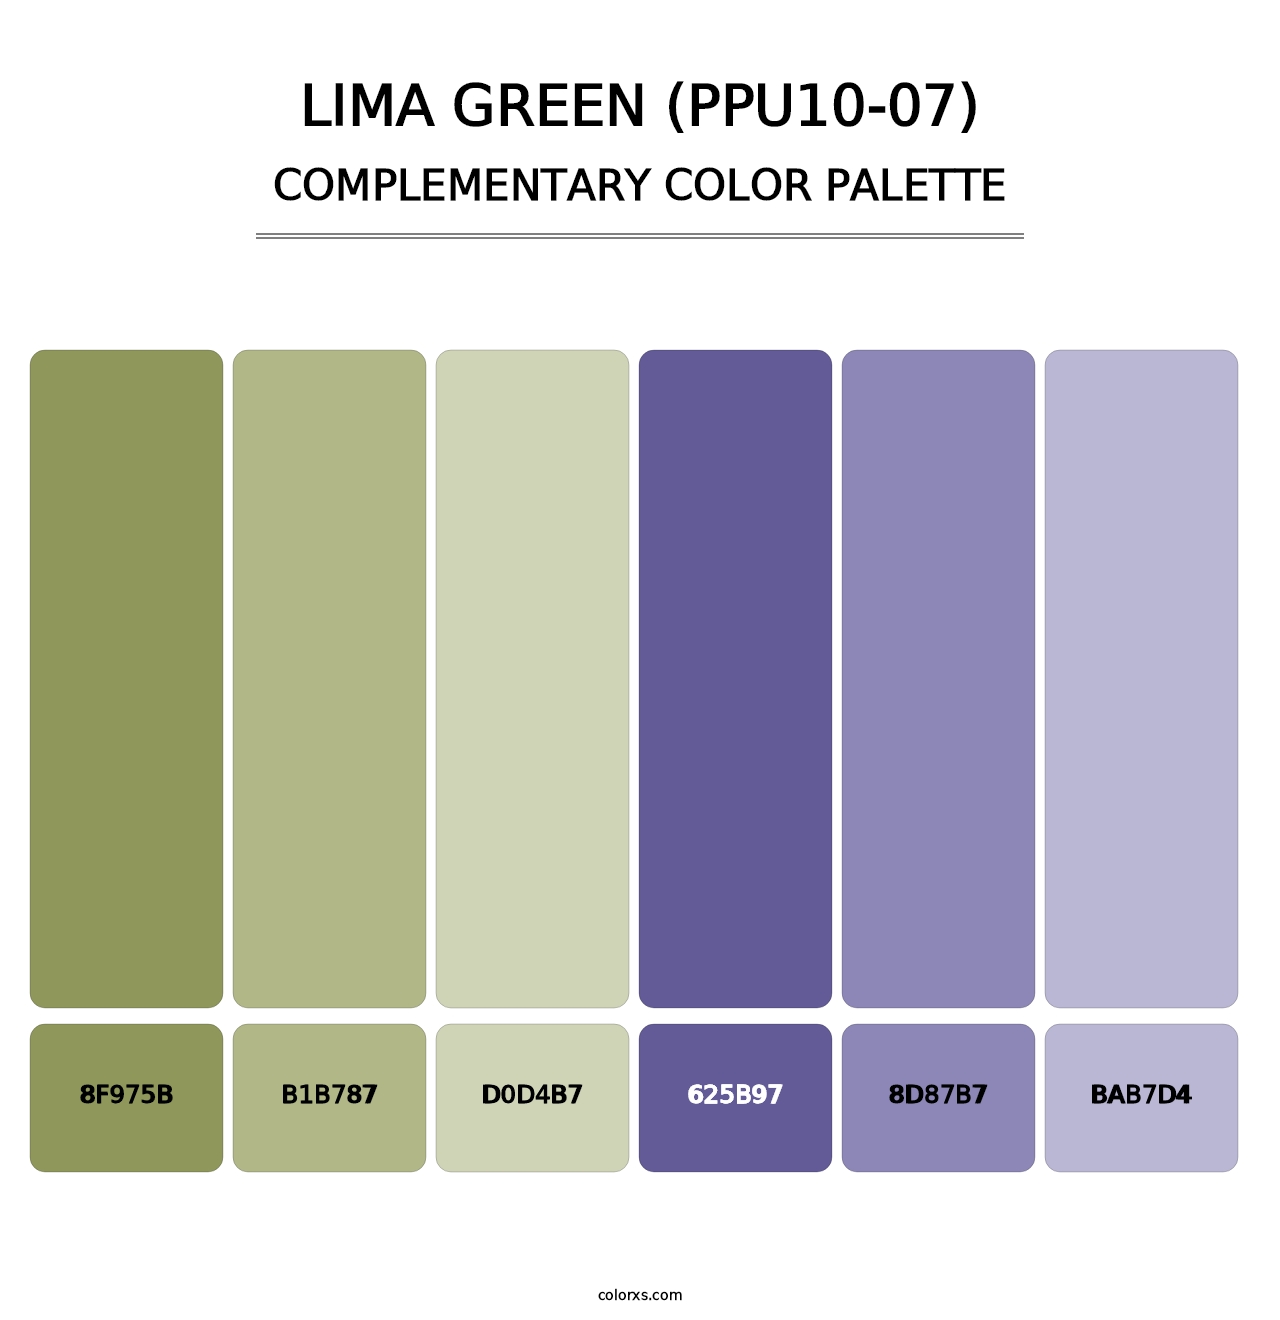 Lima Green (PPU10-07) - Complementary Color Palette